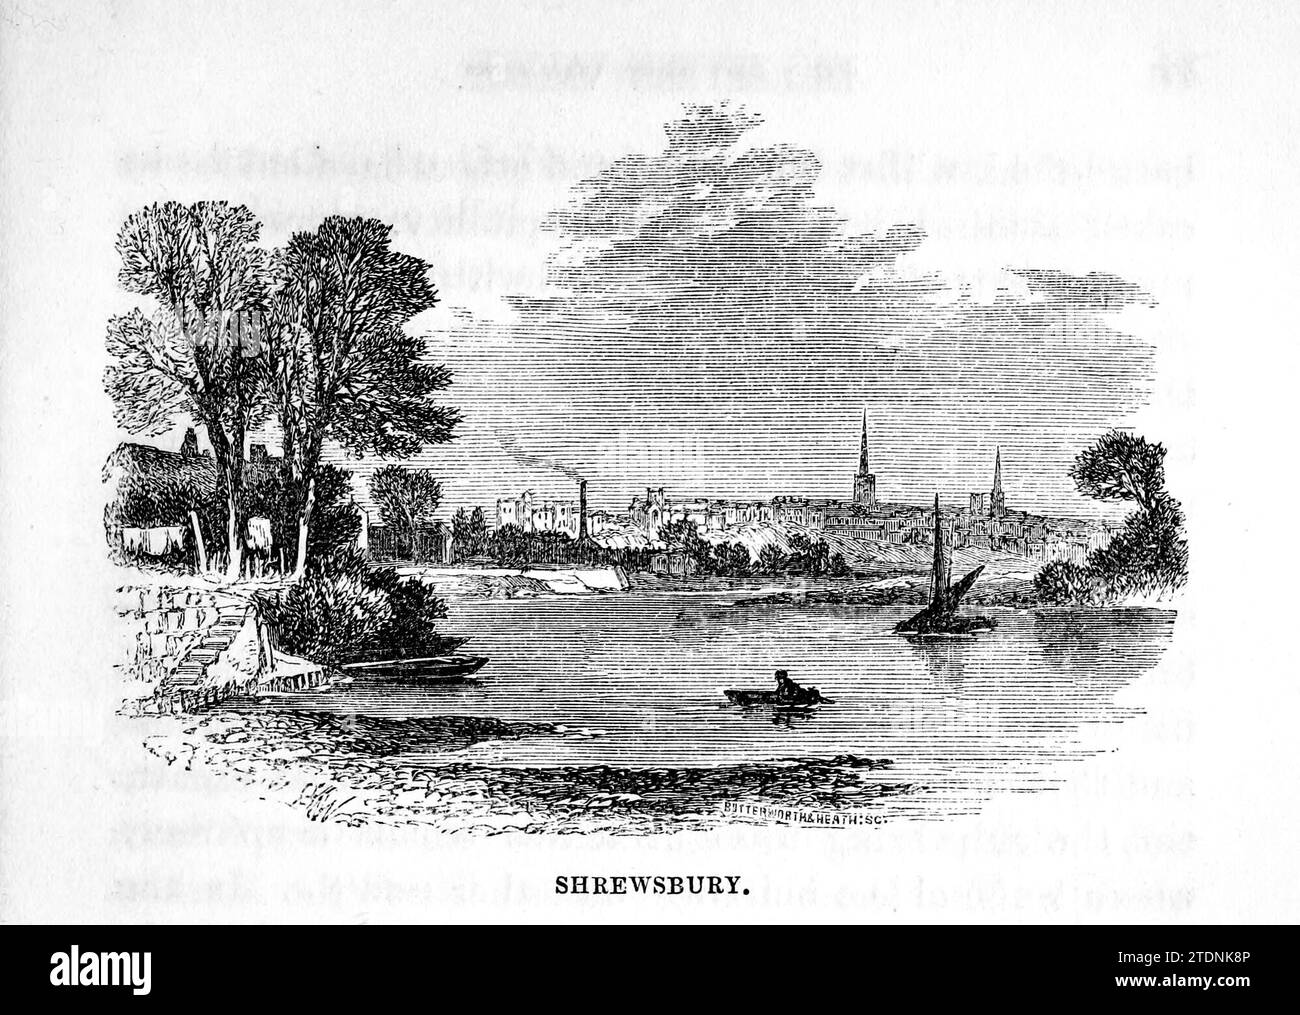 Shrewsbury is a market town, civil parish and the county town of Shropshire, England, on the River Severn, from the book The Severn valley: a series of sketches, descriptive and pictorial, of the course of the Severn: containing notices of its topographical, industrial, and geological features; with glances at its historical and legendary associations by Randall, John, 1810-1910 Publication date 1862 Publisher J. S. Virtue Stock Photo